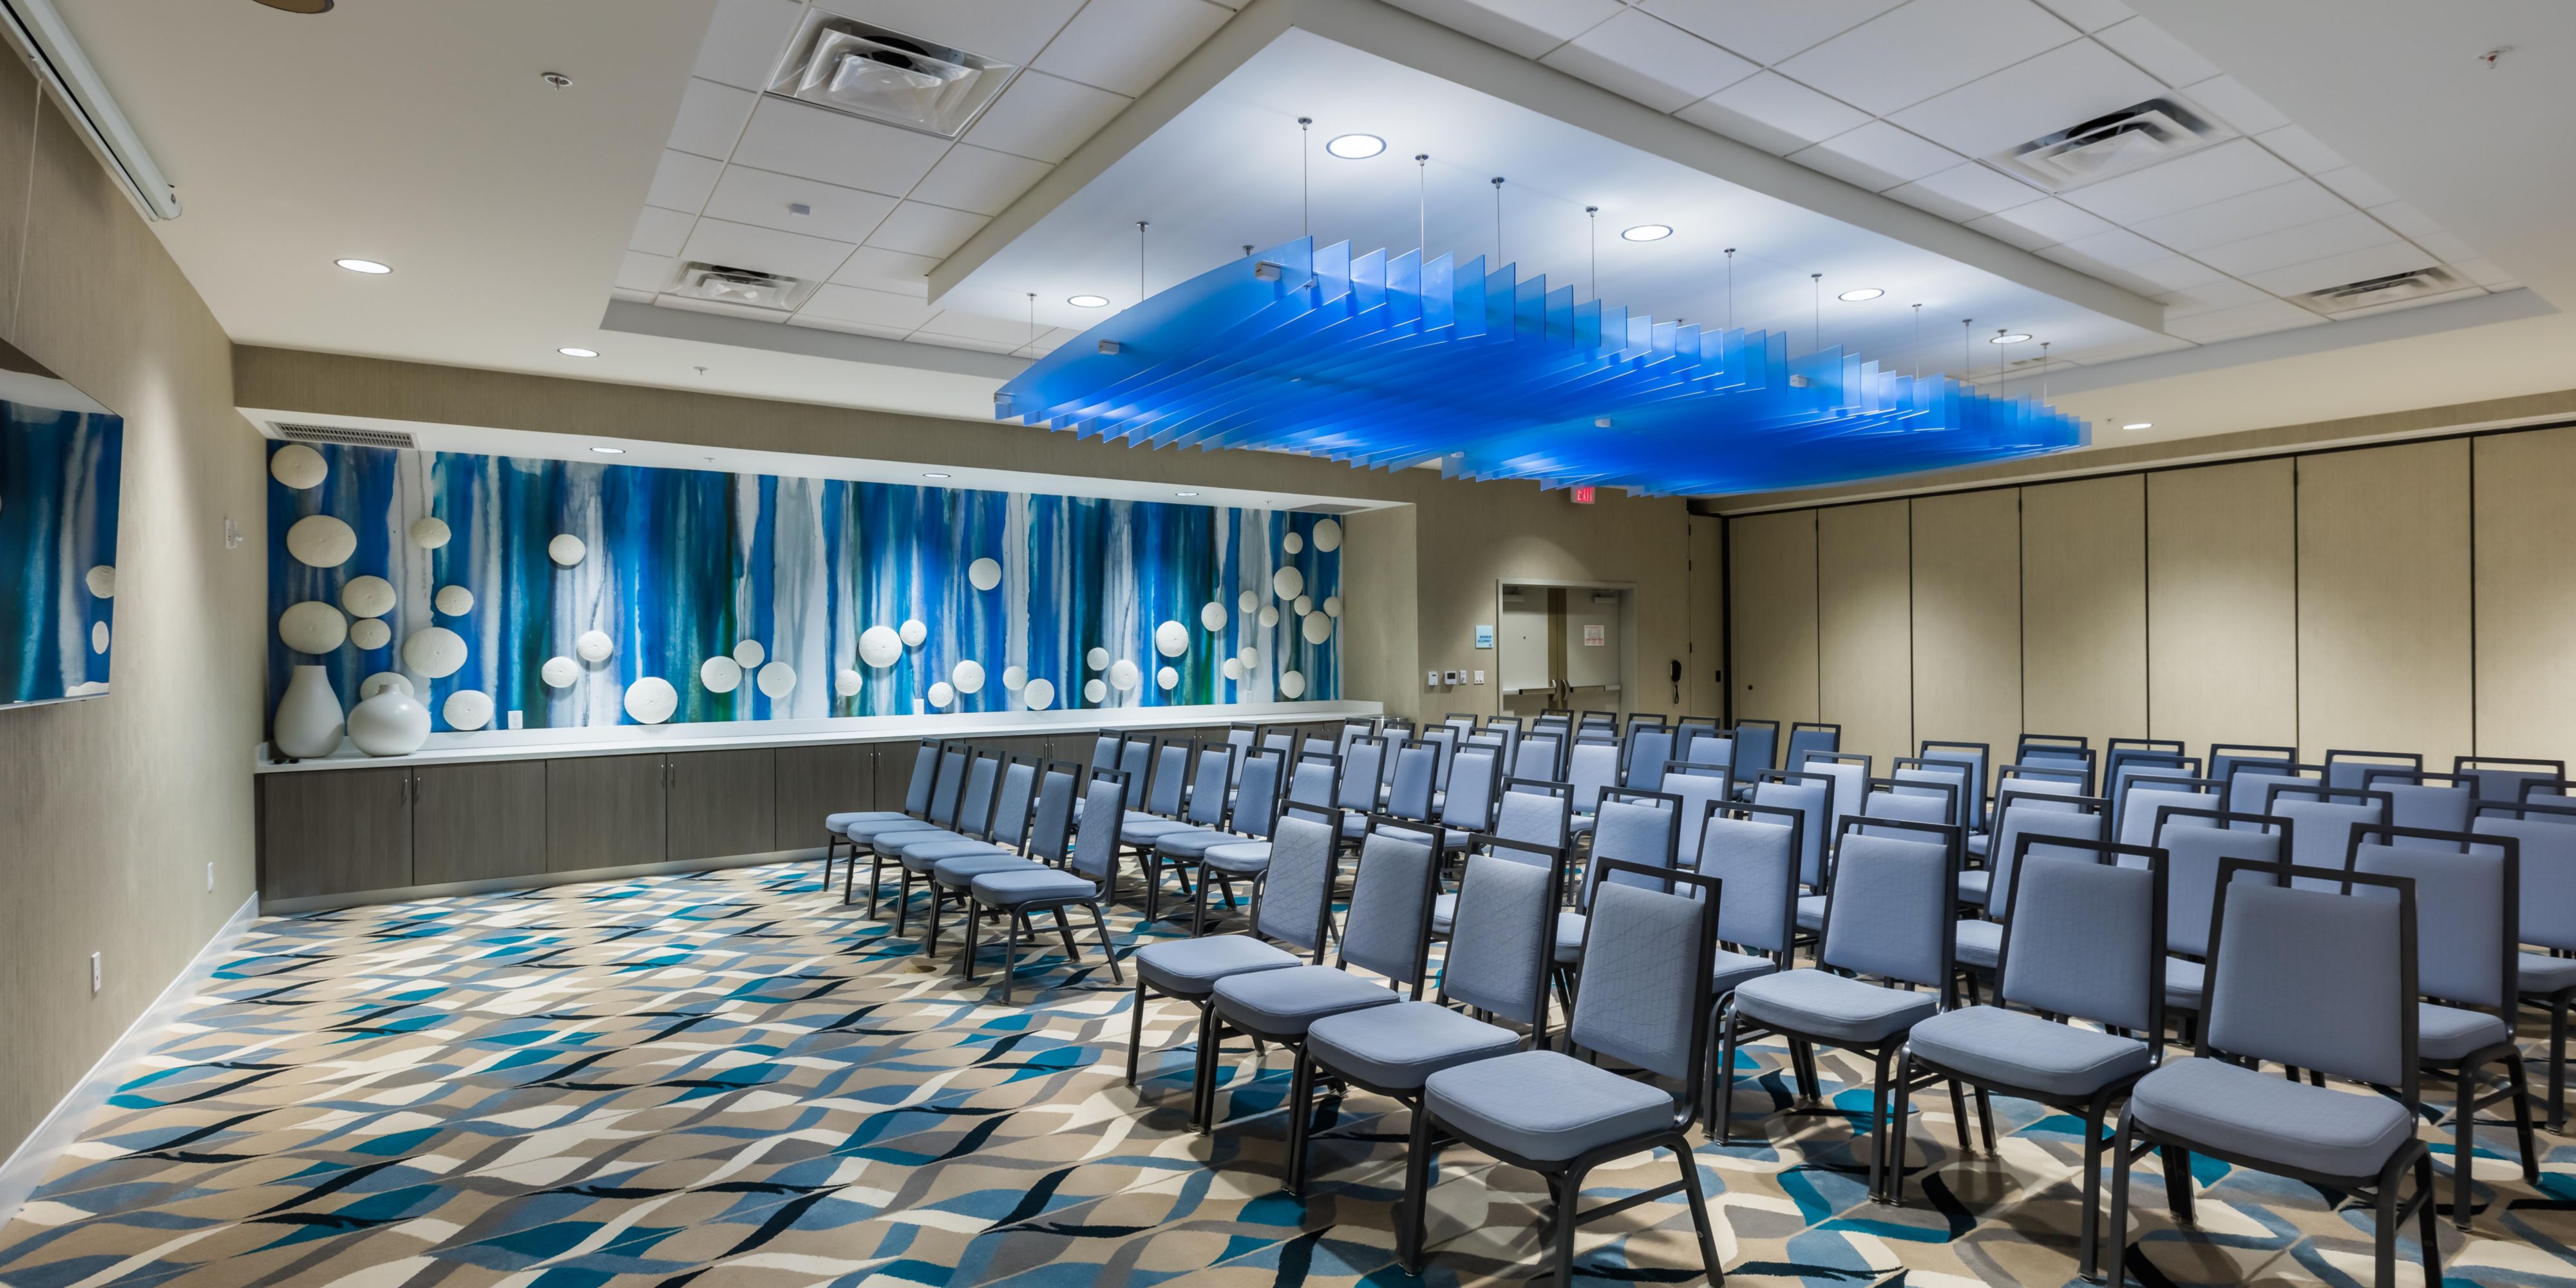 Find your space with us! Our property features meeting and event spaces and we save you time and money with our complete meeting packages that offer simple per-person pricing and a standard package of amenities. We make planning easy so you can focus your time on making your meeting a success.